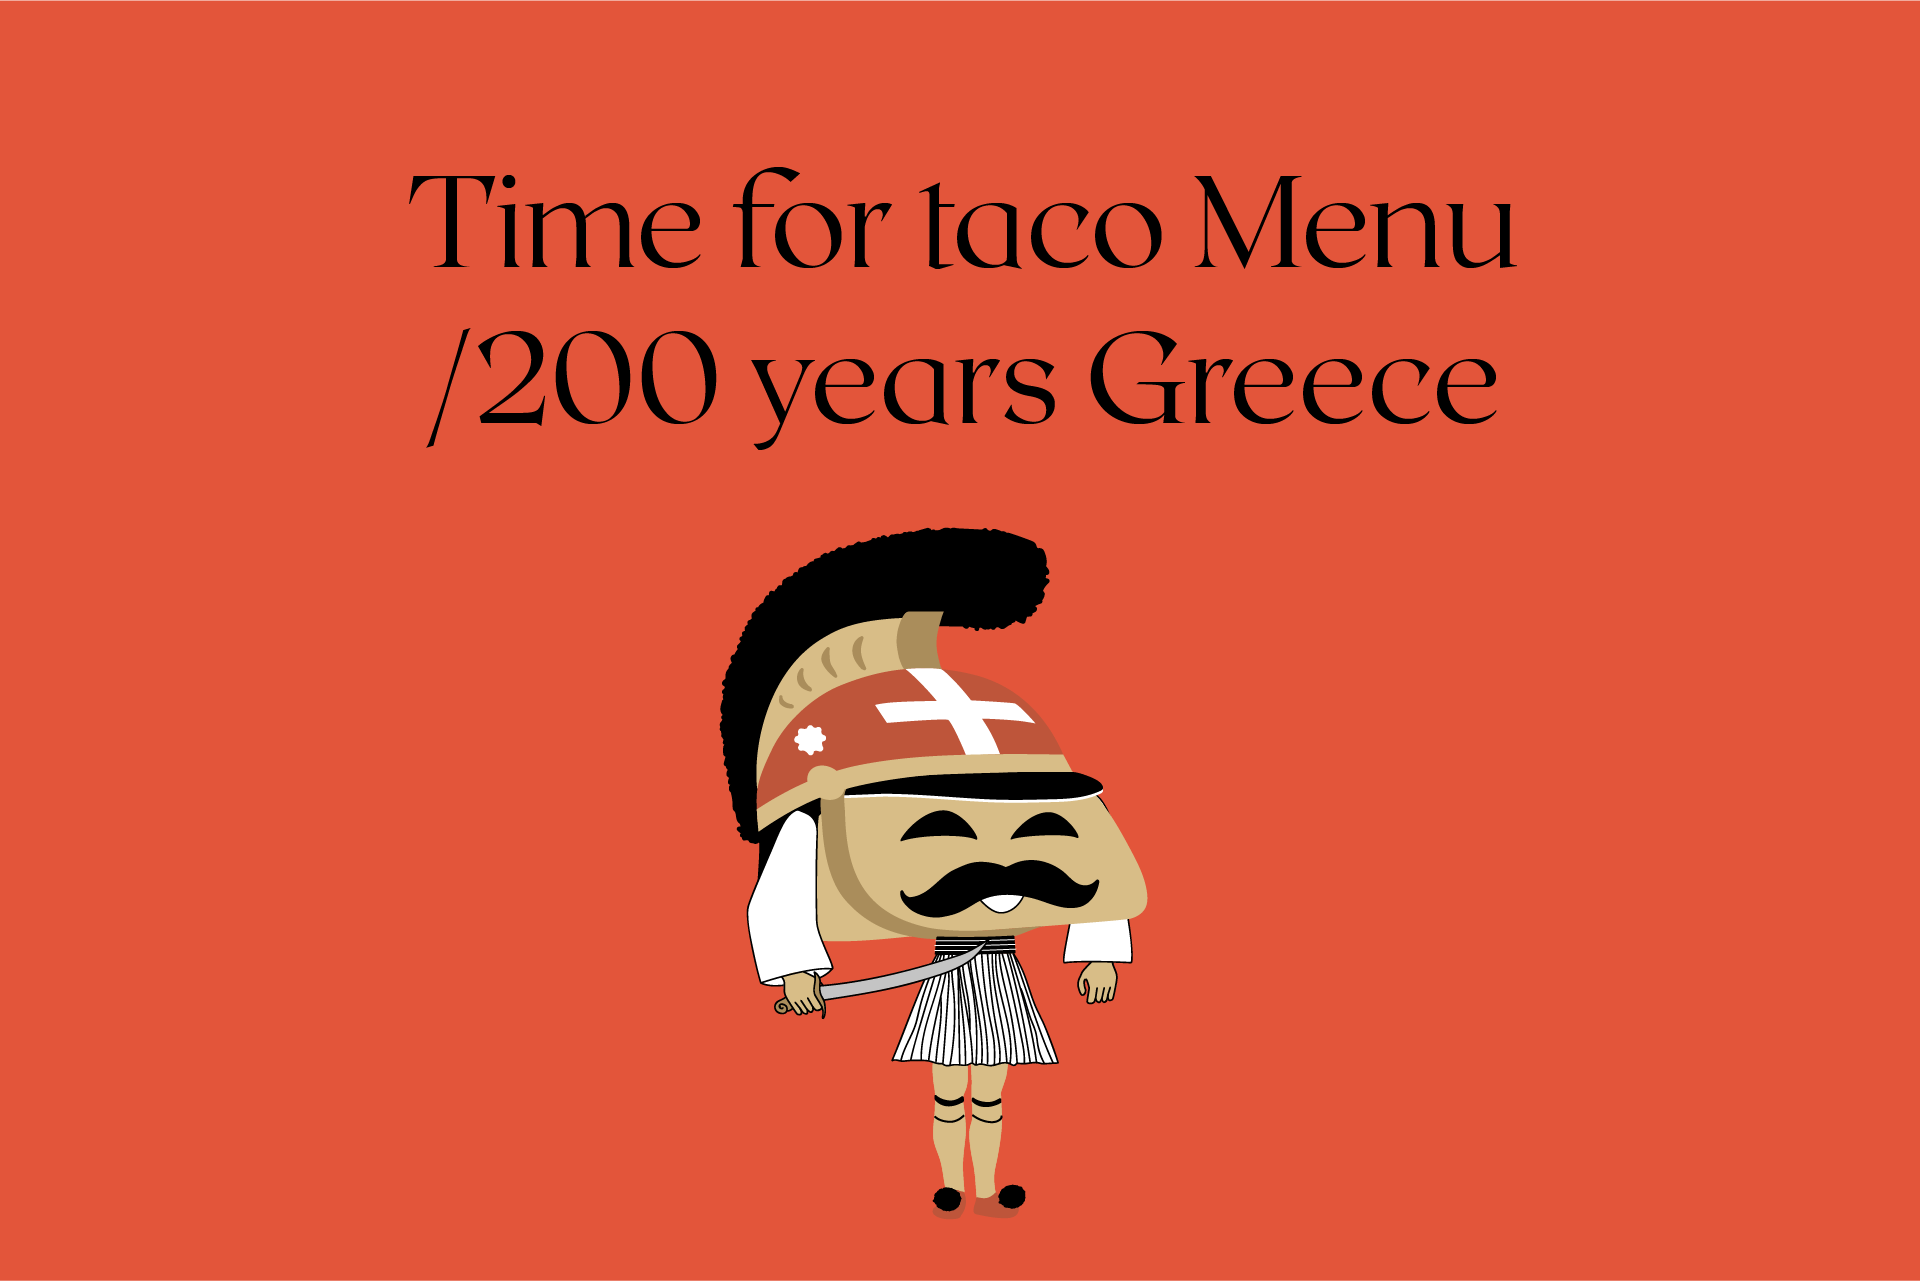 Time for taco Menu / 200 years Greece